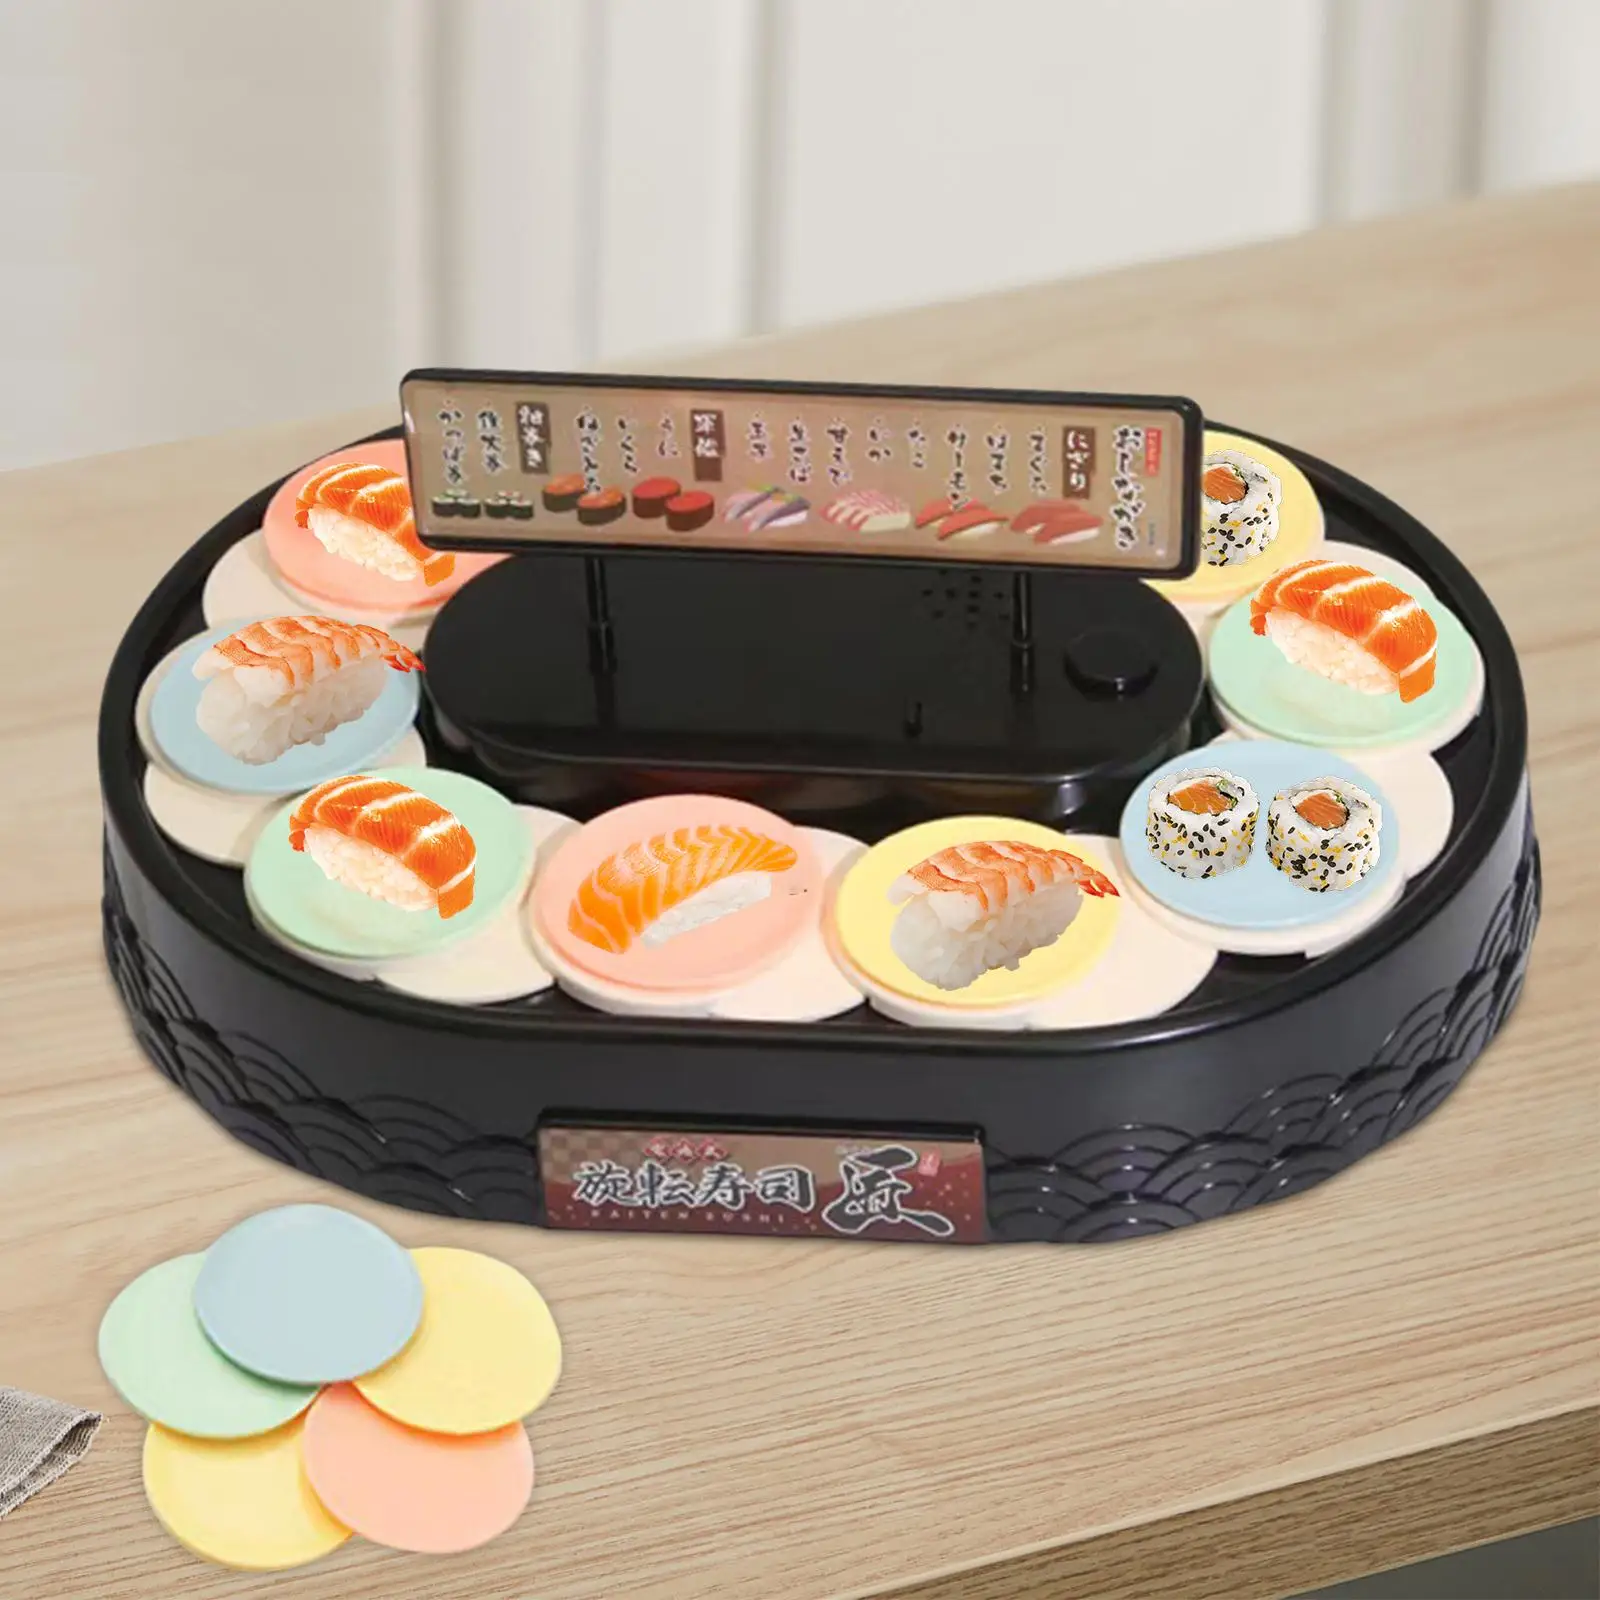 Sushi Machine Rotating Cupcake Display Stand 360 Degree Automatic Rotating Table Display Stand for Jewelry Sushi Birthday